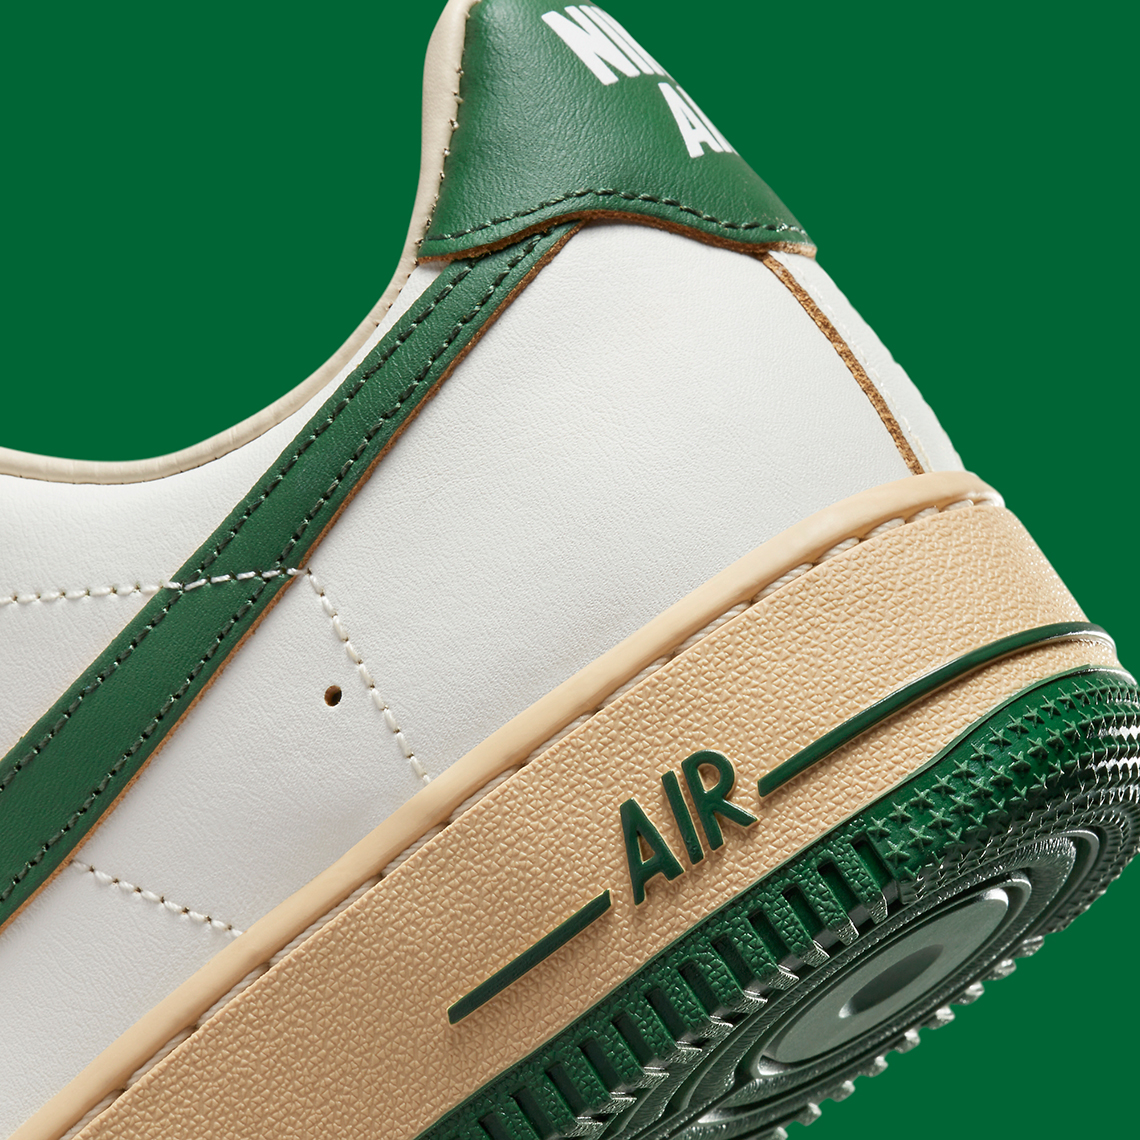 Nike Air Force 1 '07 LX in summit white and gorge green. Review